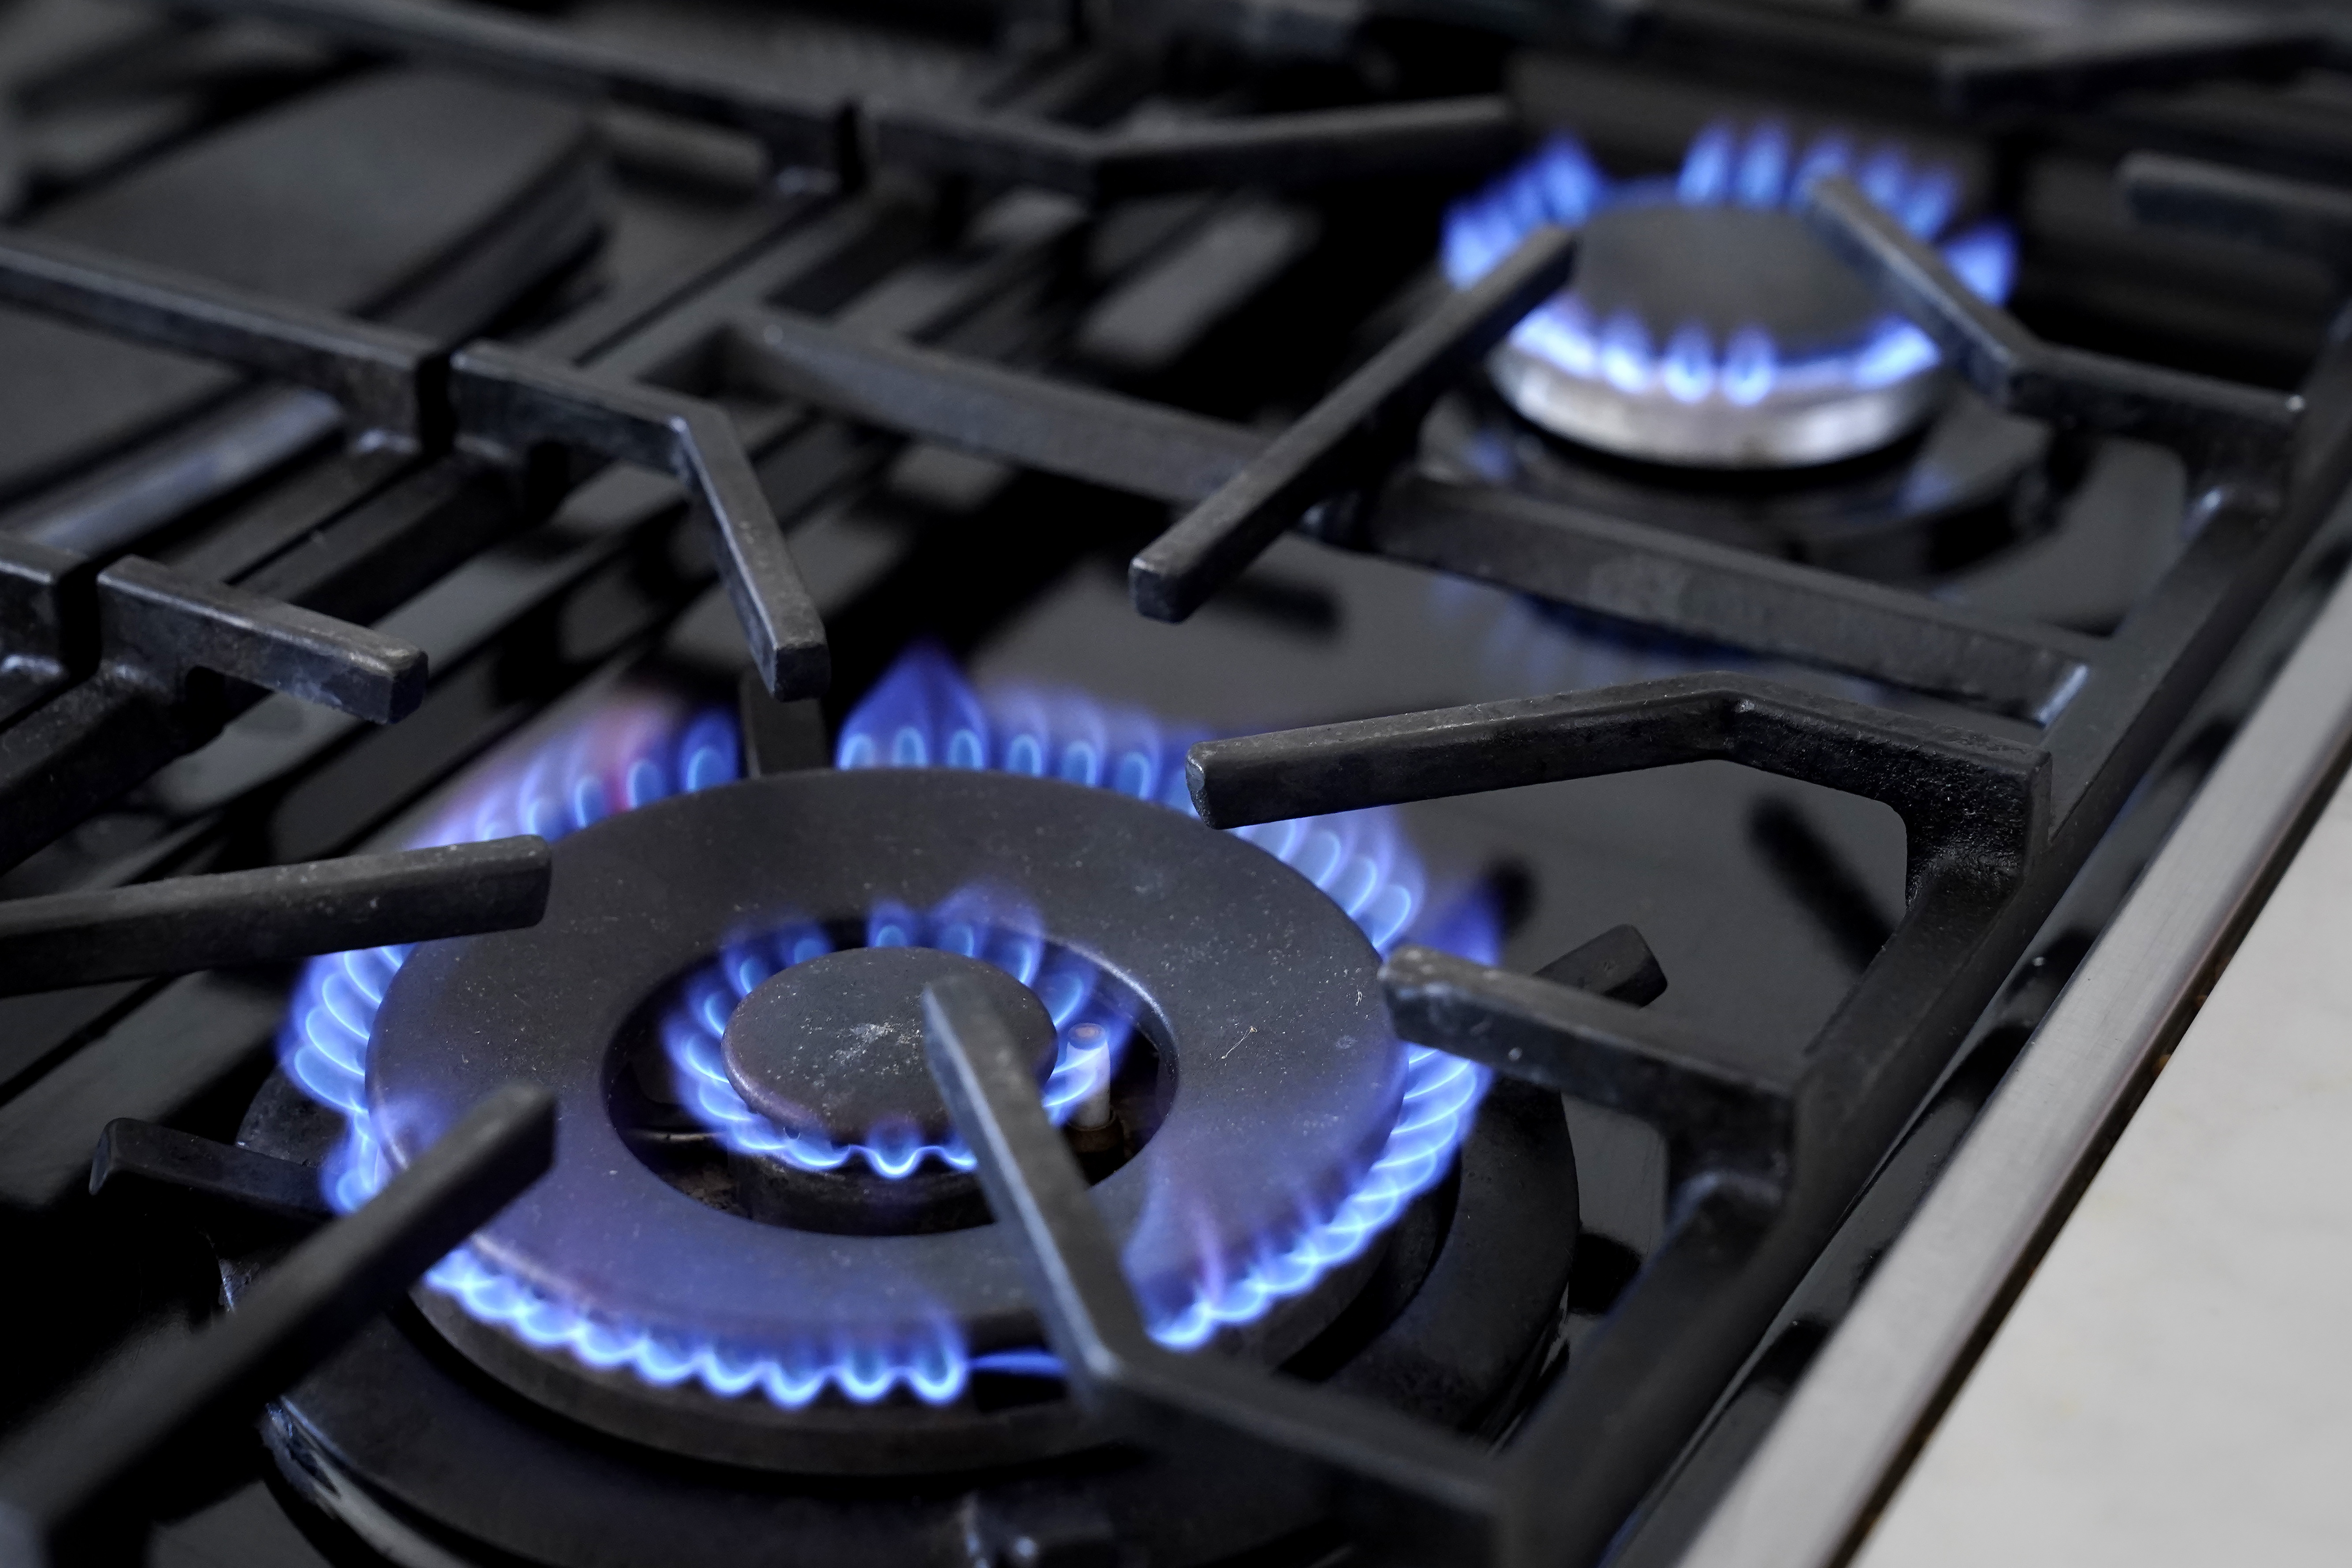 A gas stove ban could help climate and health problems. But